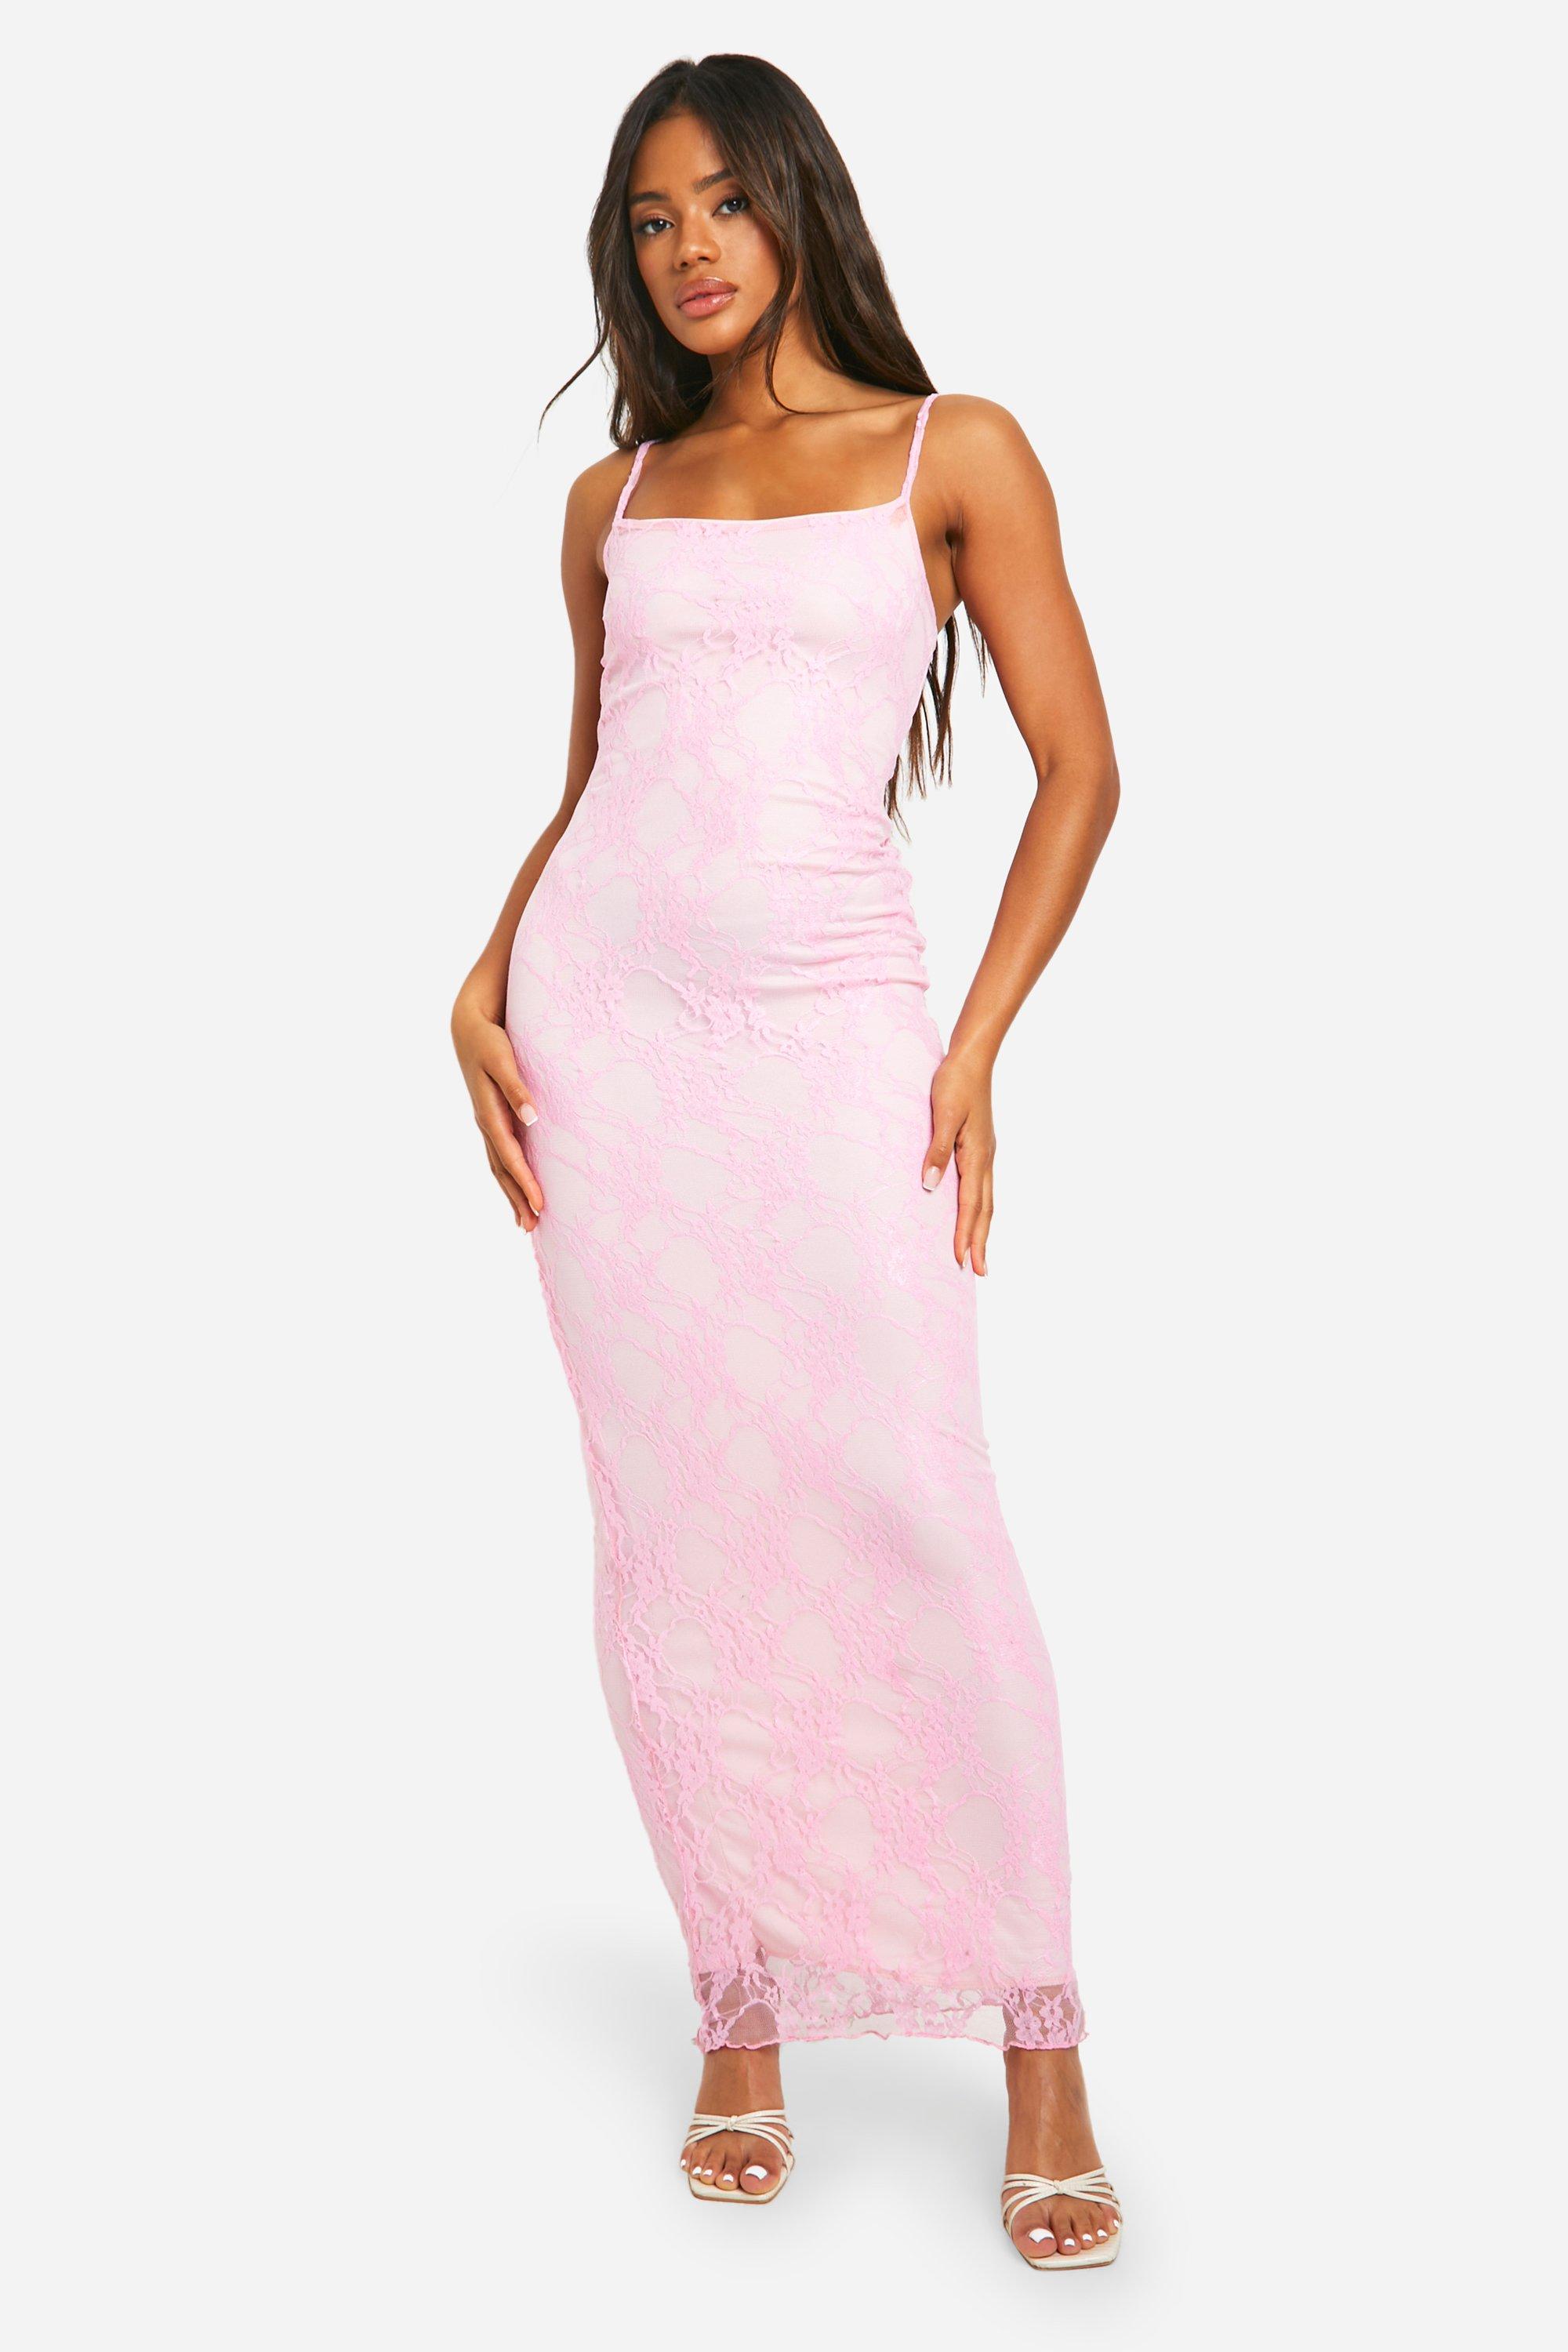 Boohoo Square Neck Strappy Lace Maxi Dress, Baby Pink